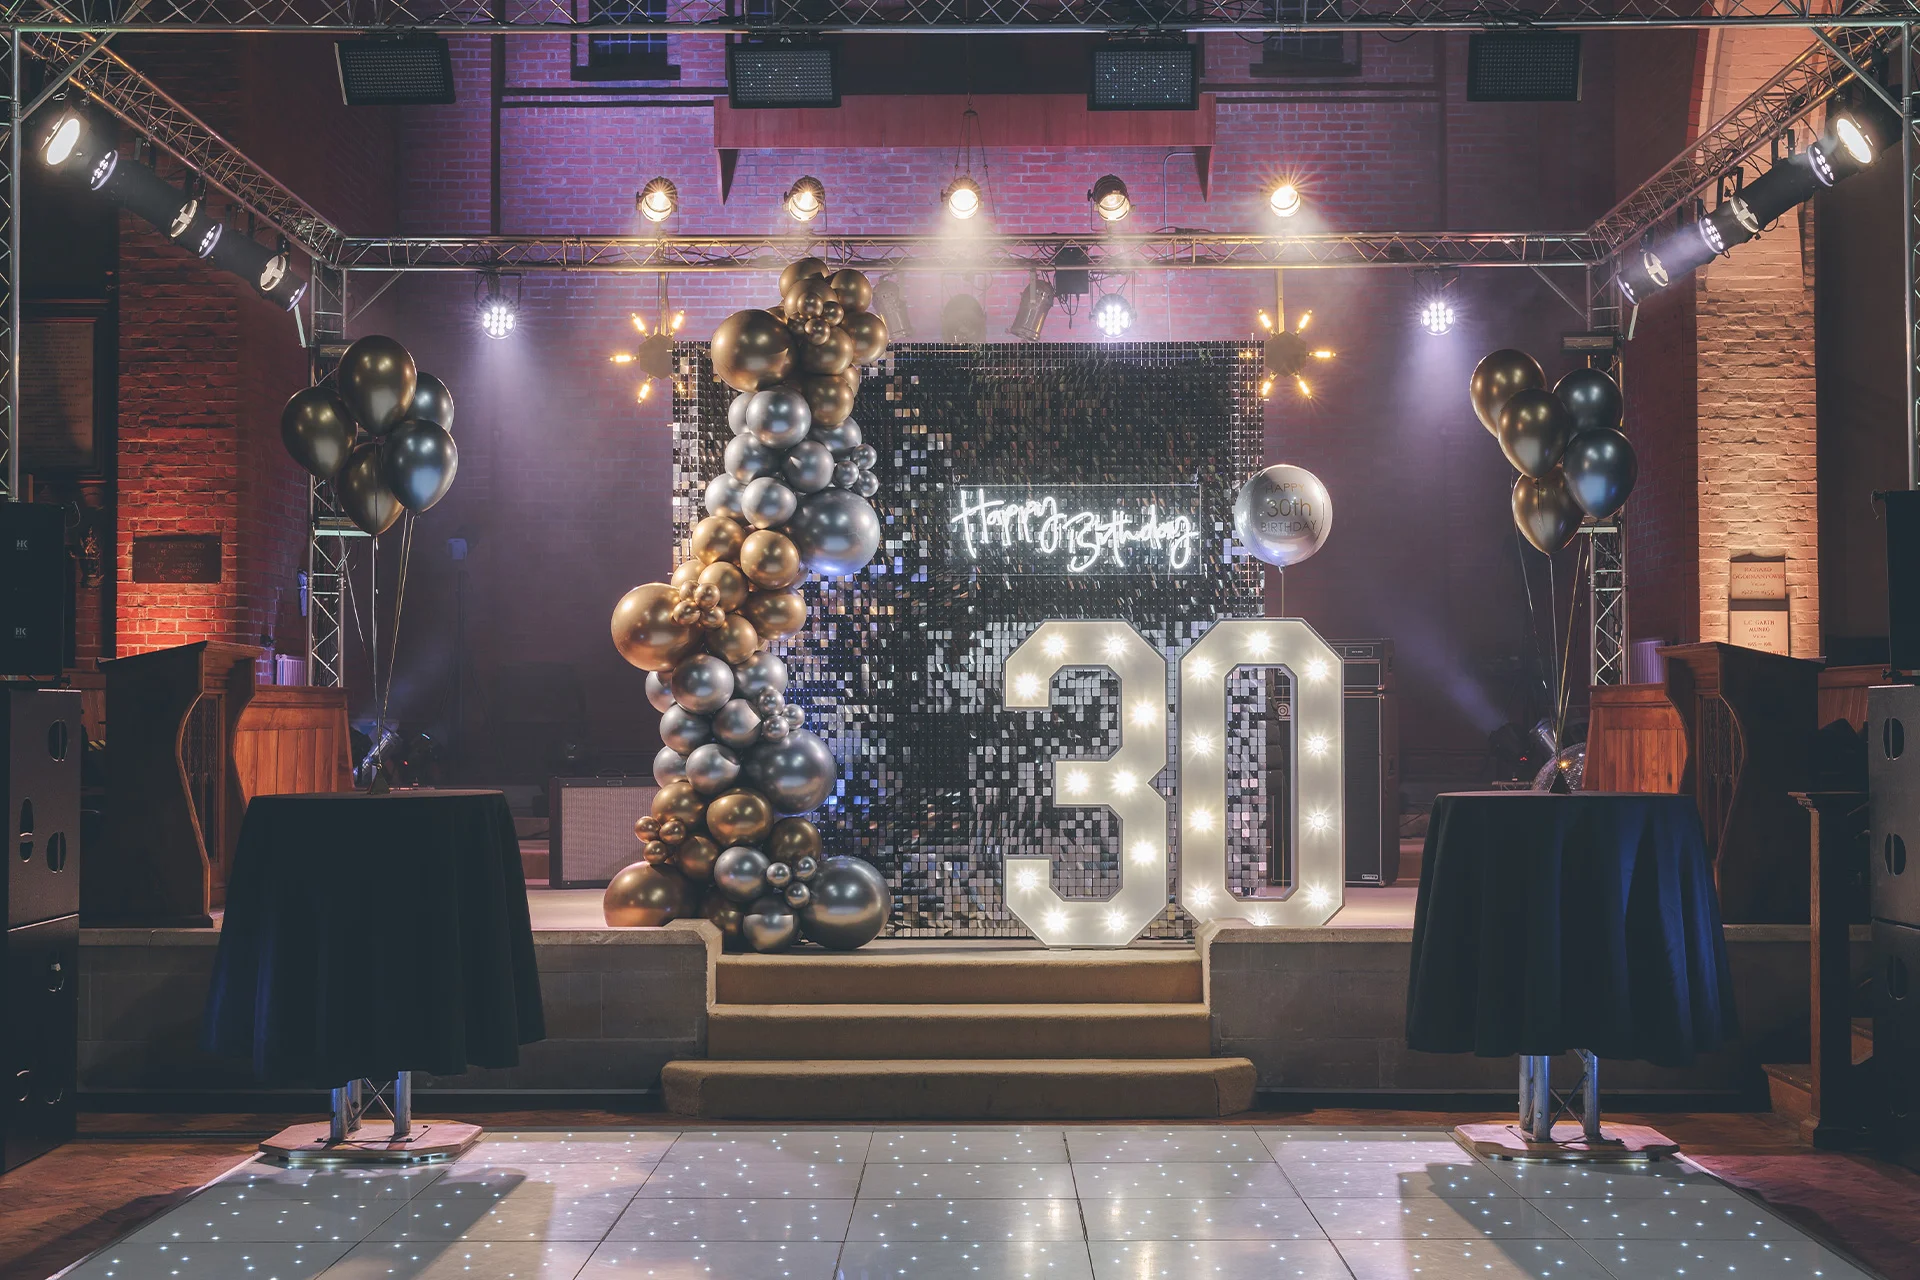 How can I create a visually exciting backdrop for party photos?